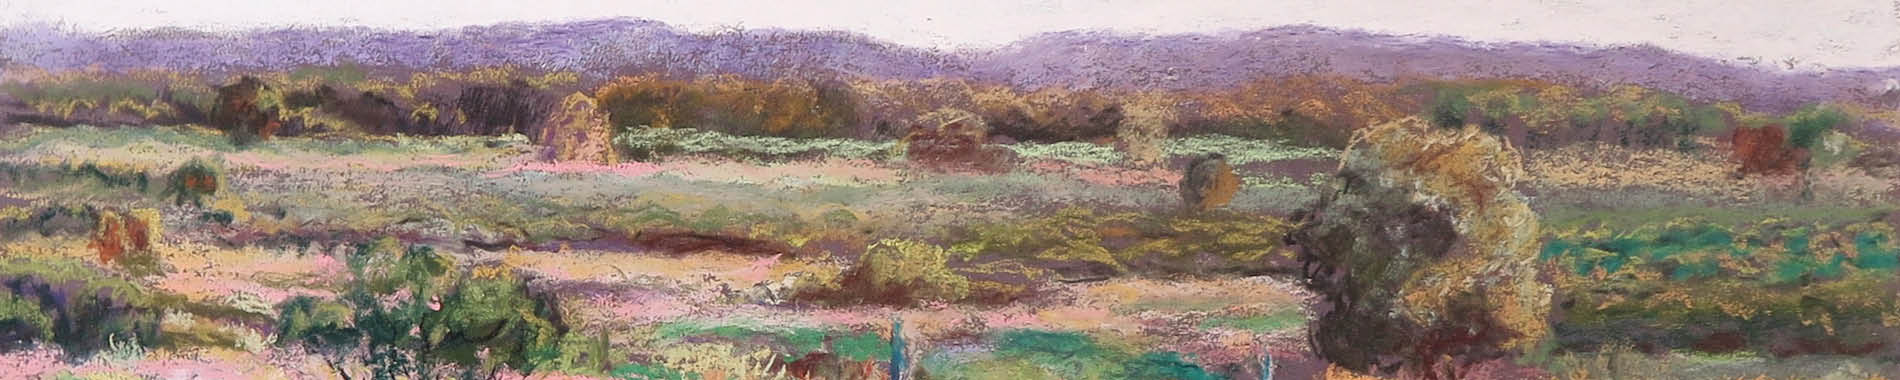 Auda Maclean Evening Light on the Red Natal Grass 2019, pastel on paper, 30.5 x 46 cm.